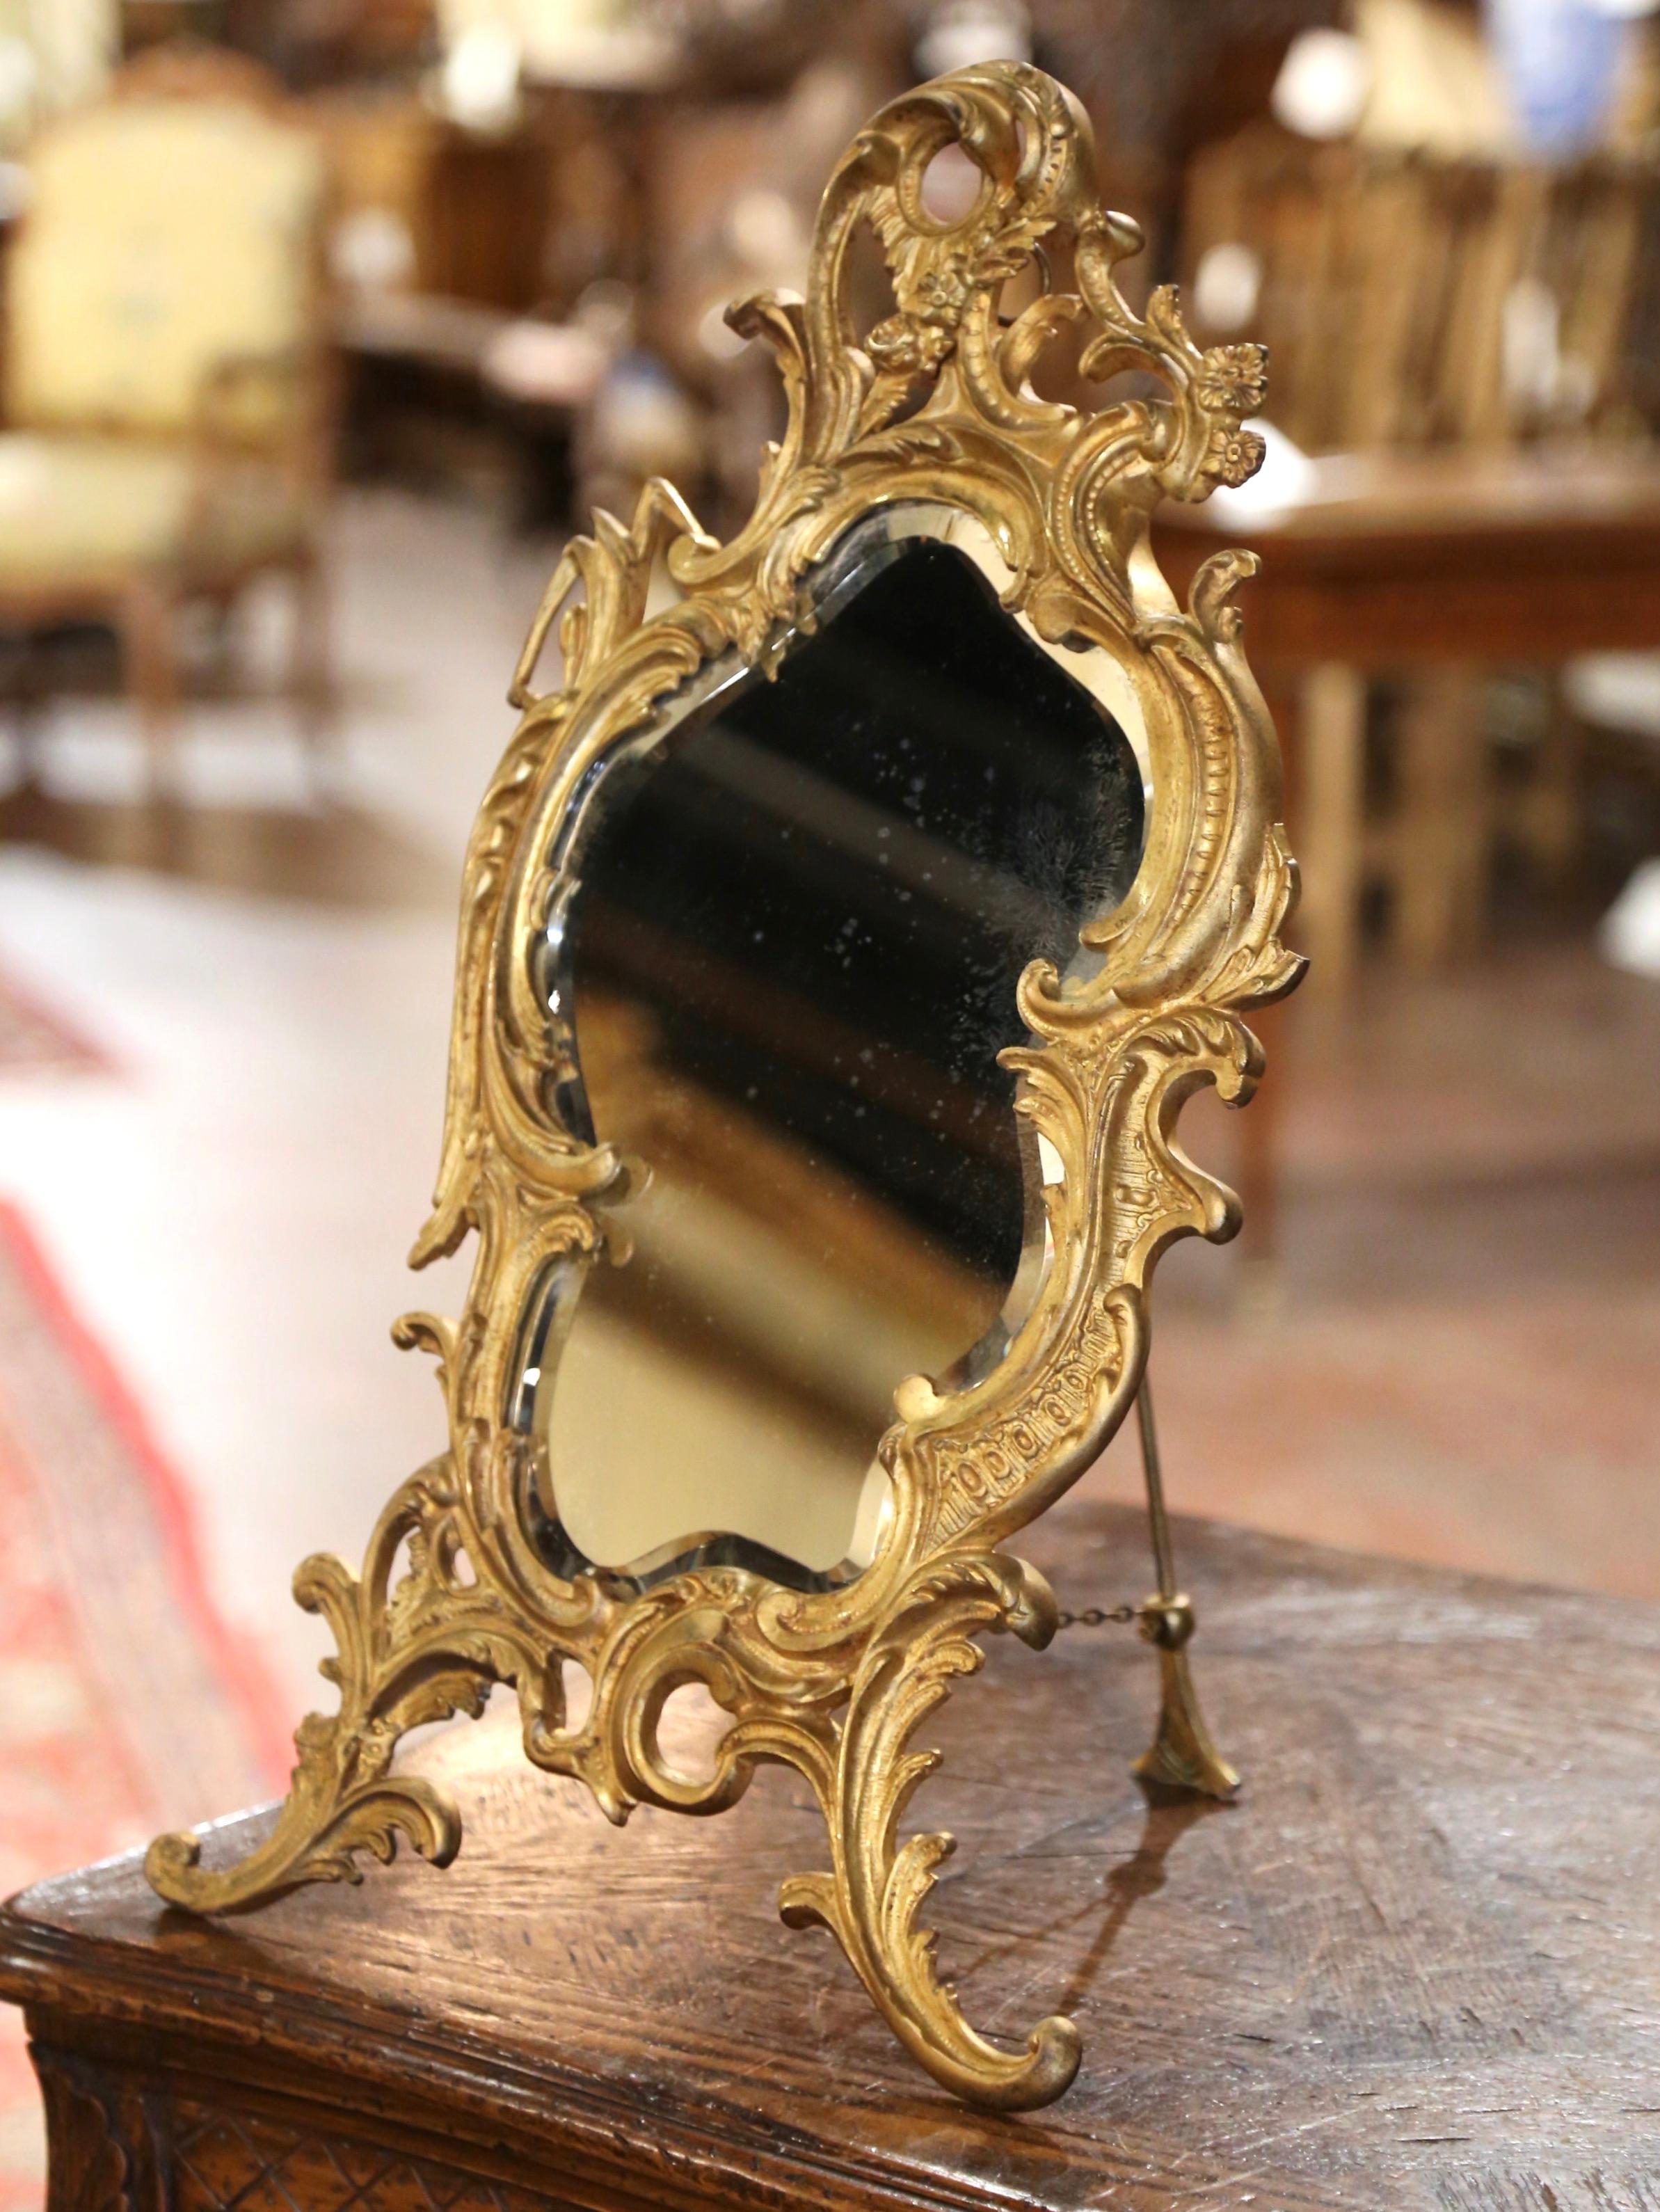 Decorate your master bath counter with this elegant antique dressing mirror. Crafted in France circa 1870, and built of bronze, the freestanding table mirror with curved front feet, features a centred ornate cartouche, embellished with scrolled